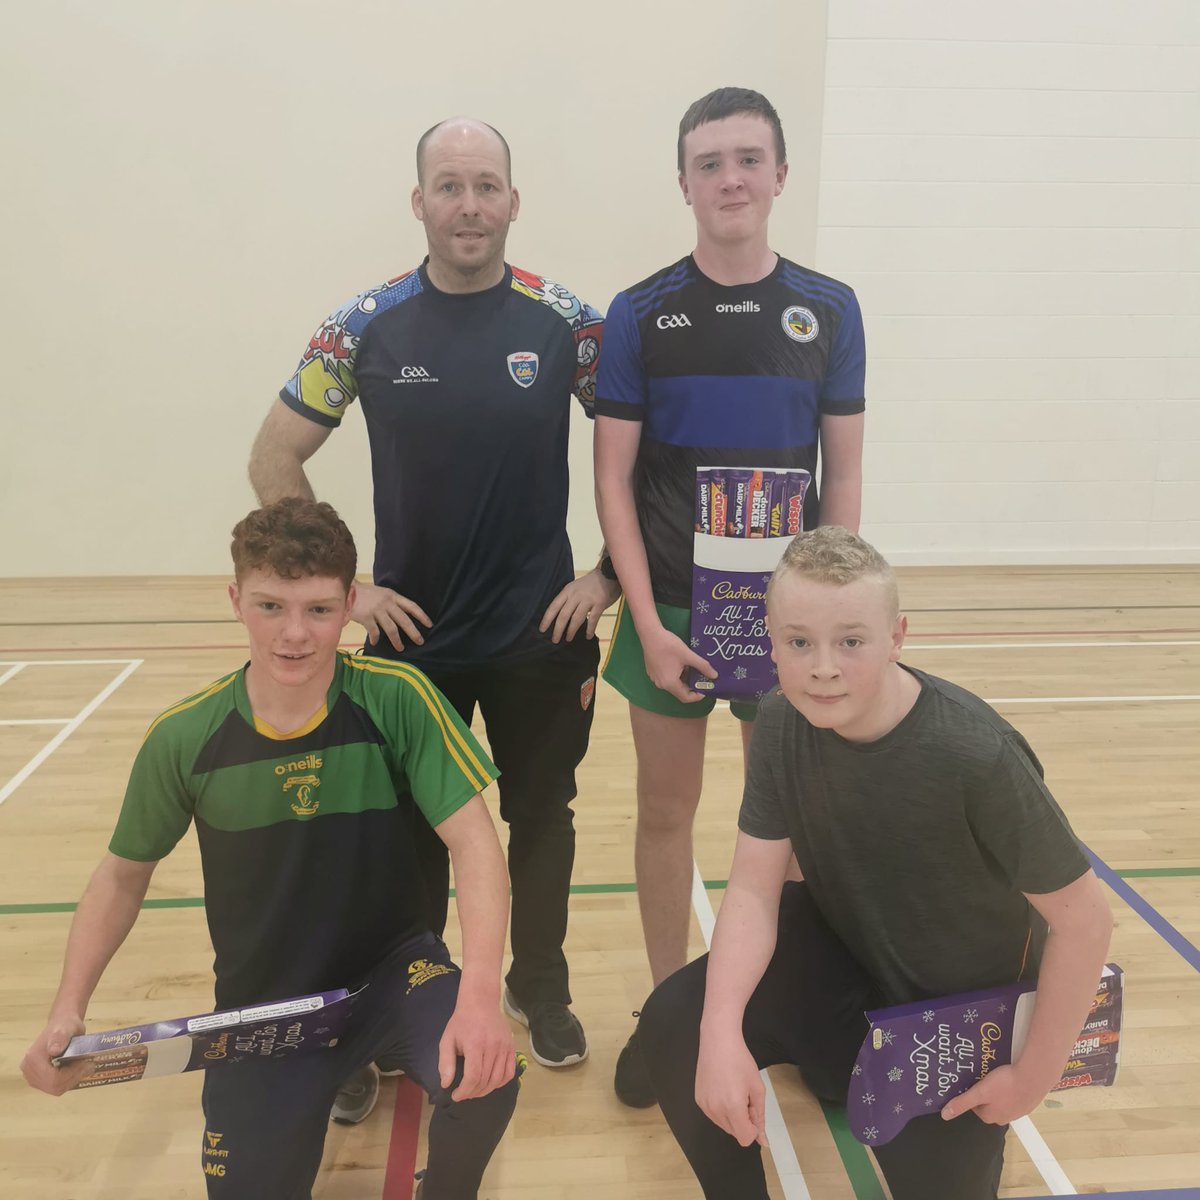 Excellent finals day in  @StjoesPE_Sport for the  @Armagh_GAA Super Games 3 v 3 indoor league competition, well done to the Armagh team on winning the competition #supergames #indoor3v3 #goalsgalore #selectionboxes